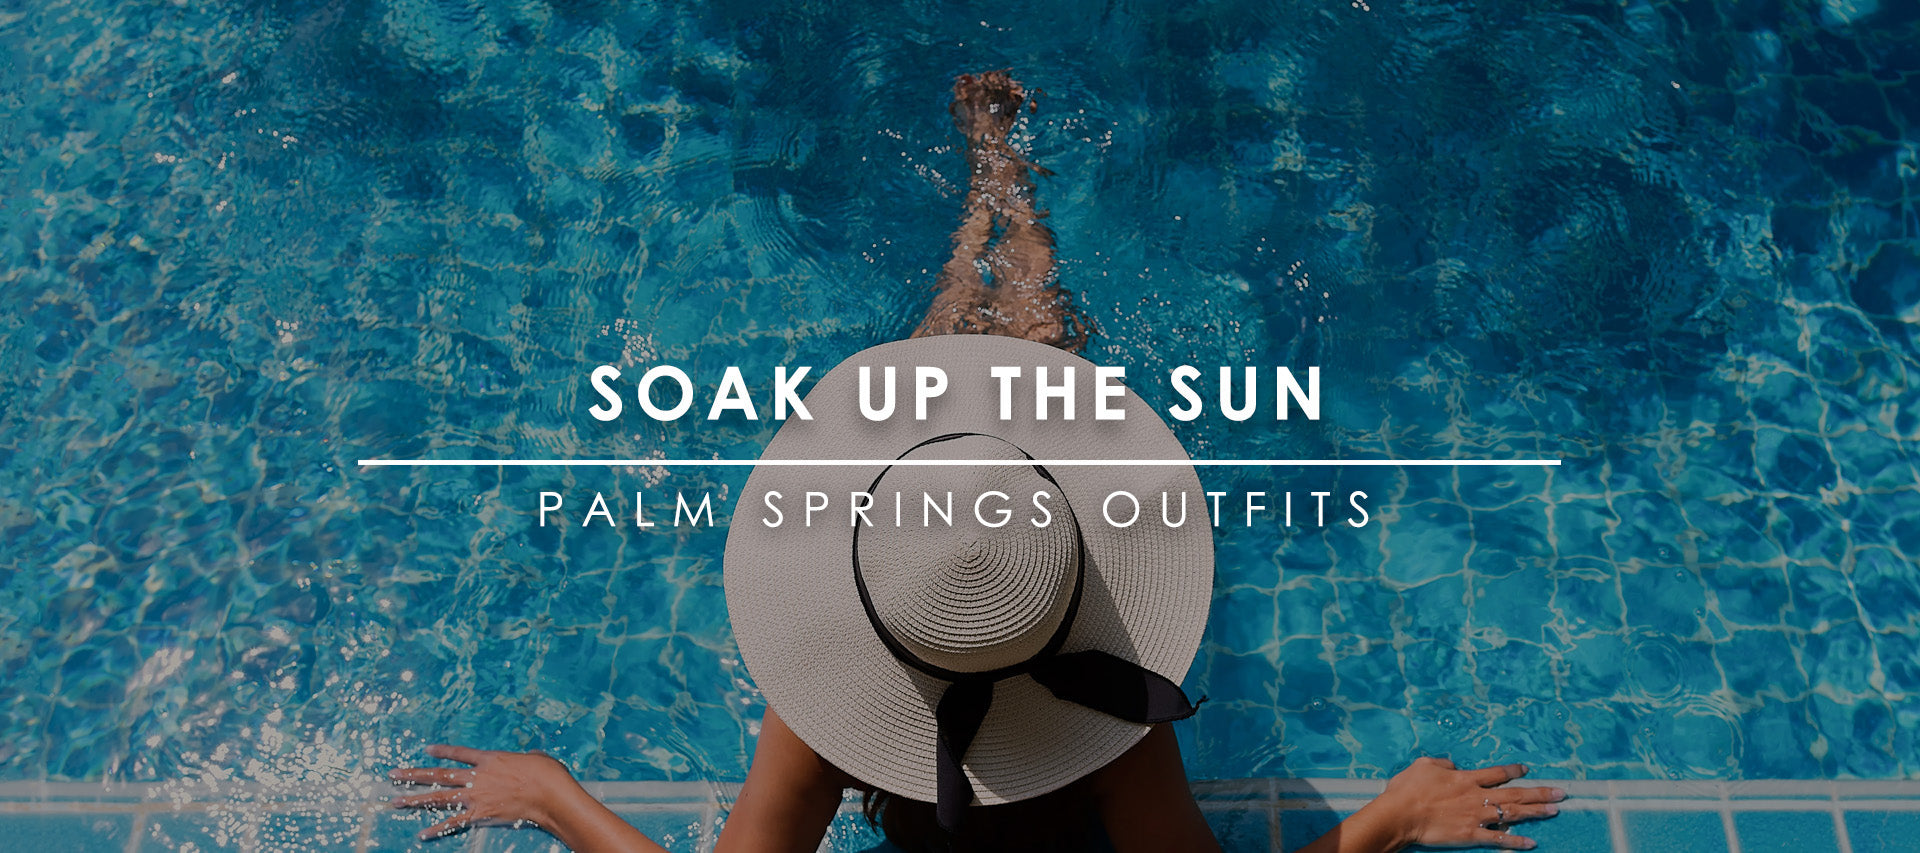 19+ Palm Springs Outfit Ideas